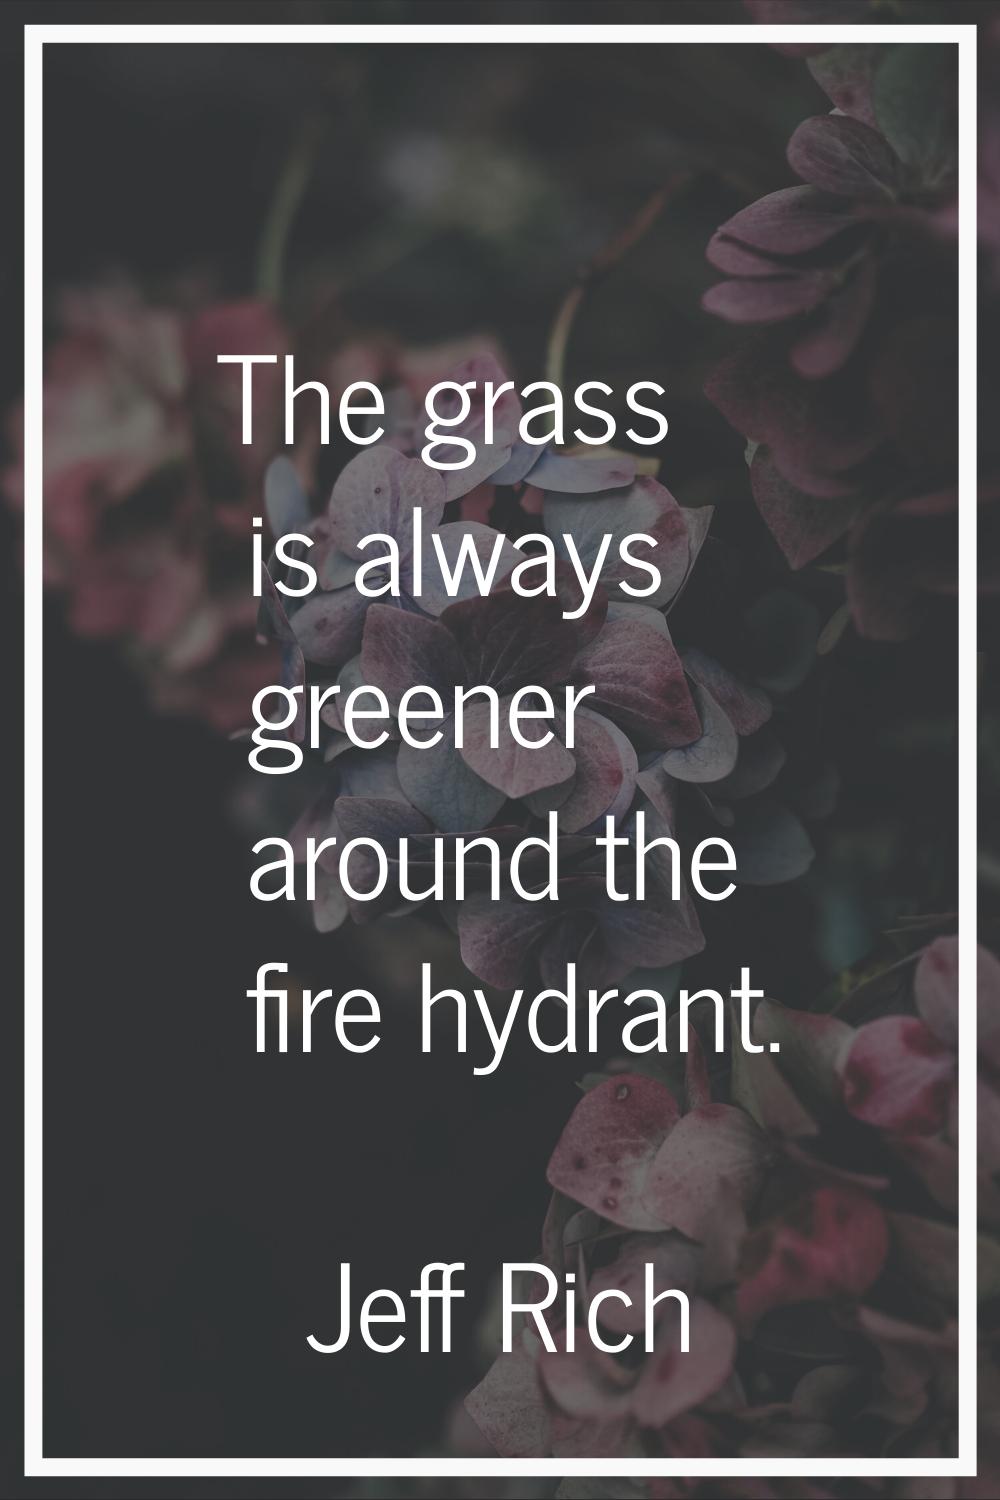 The grass is always greener around the fire hydrant.